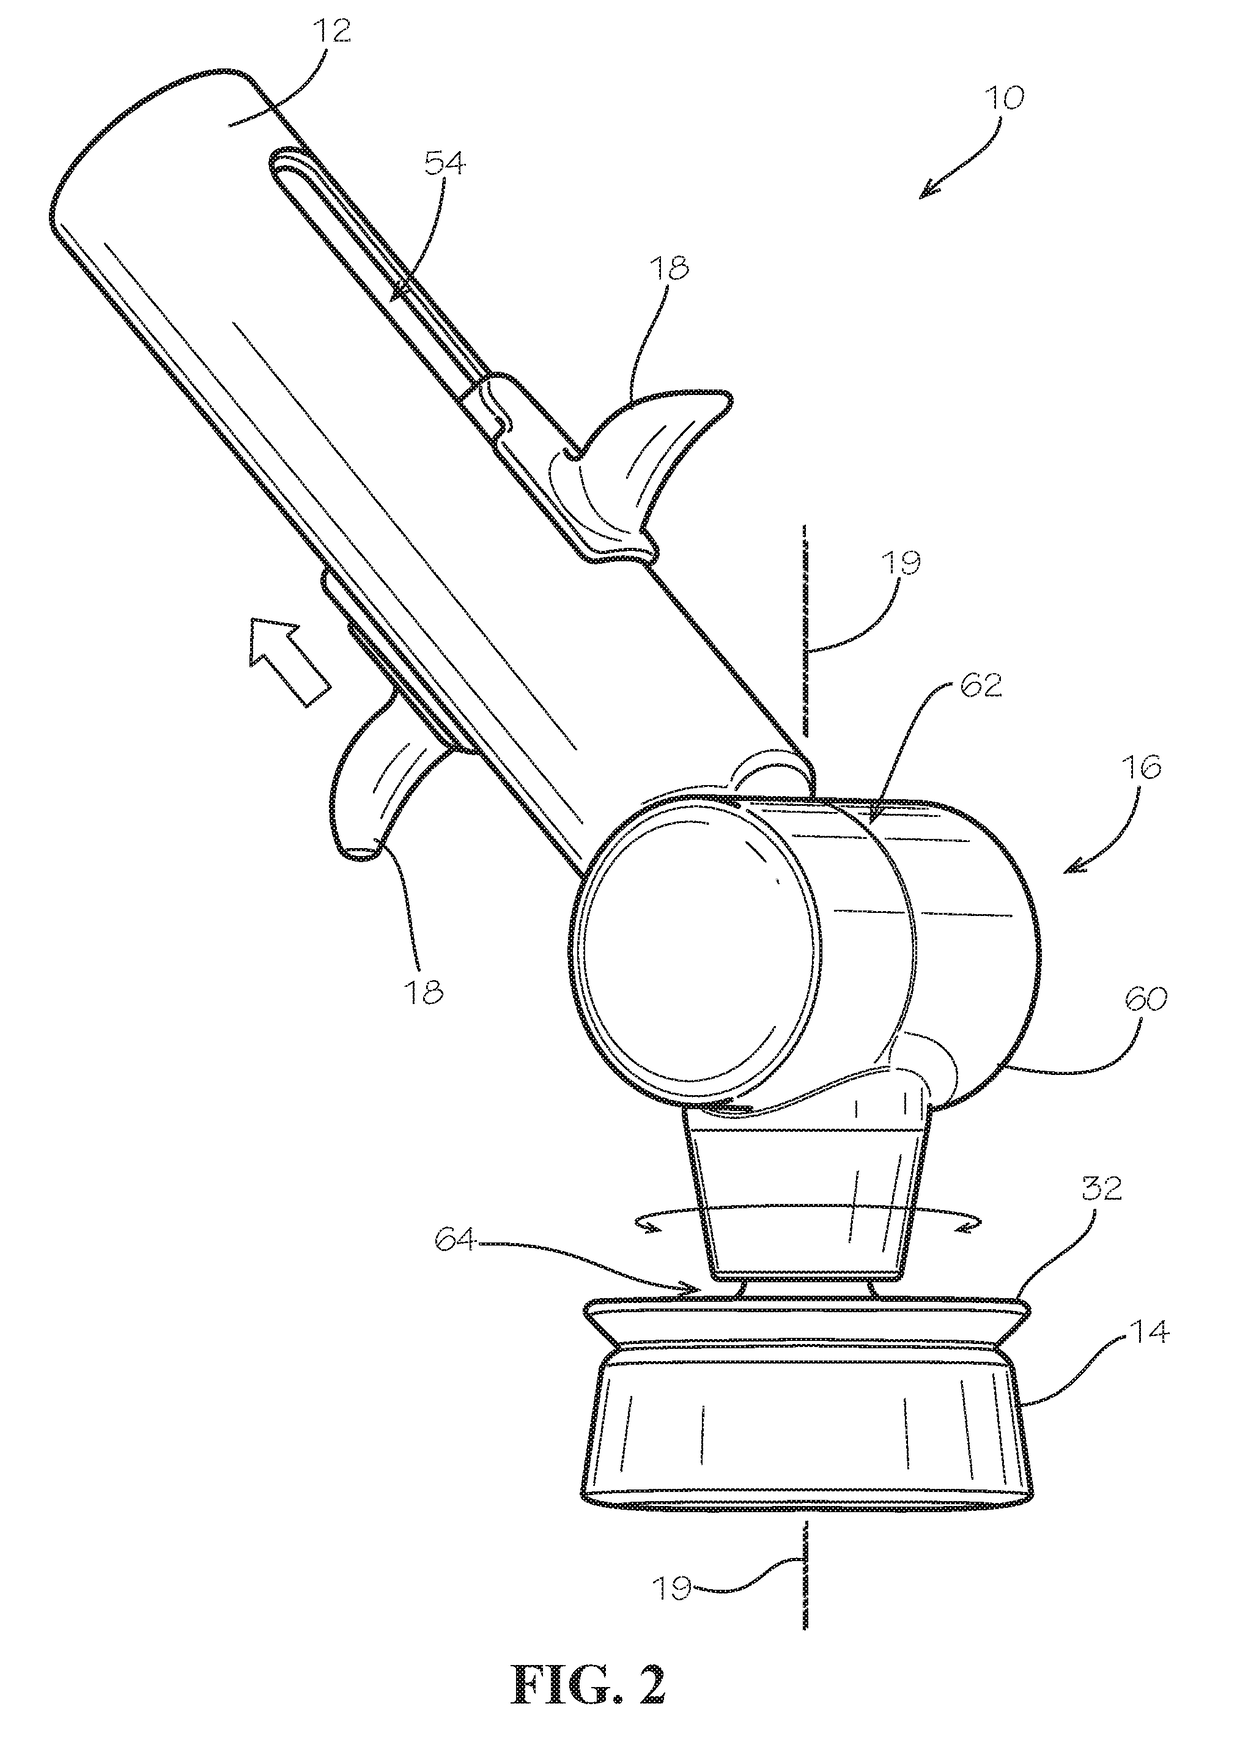 Device and methods for lifting patient tissue during laparoscopic surgery